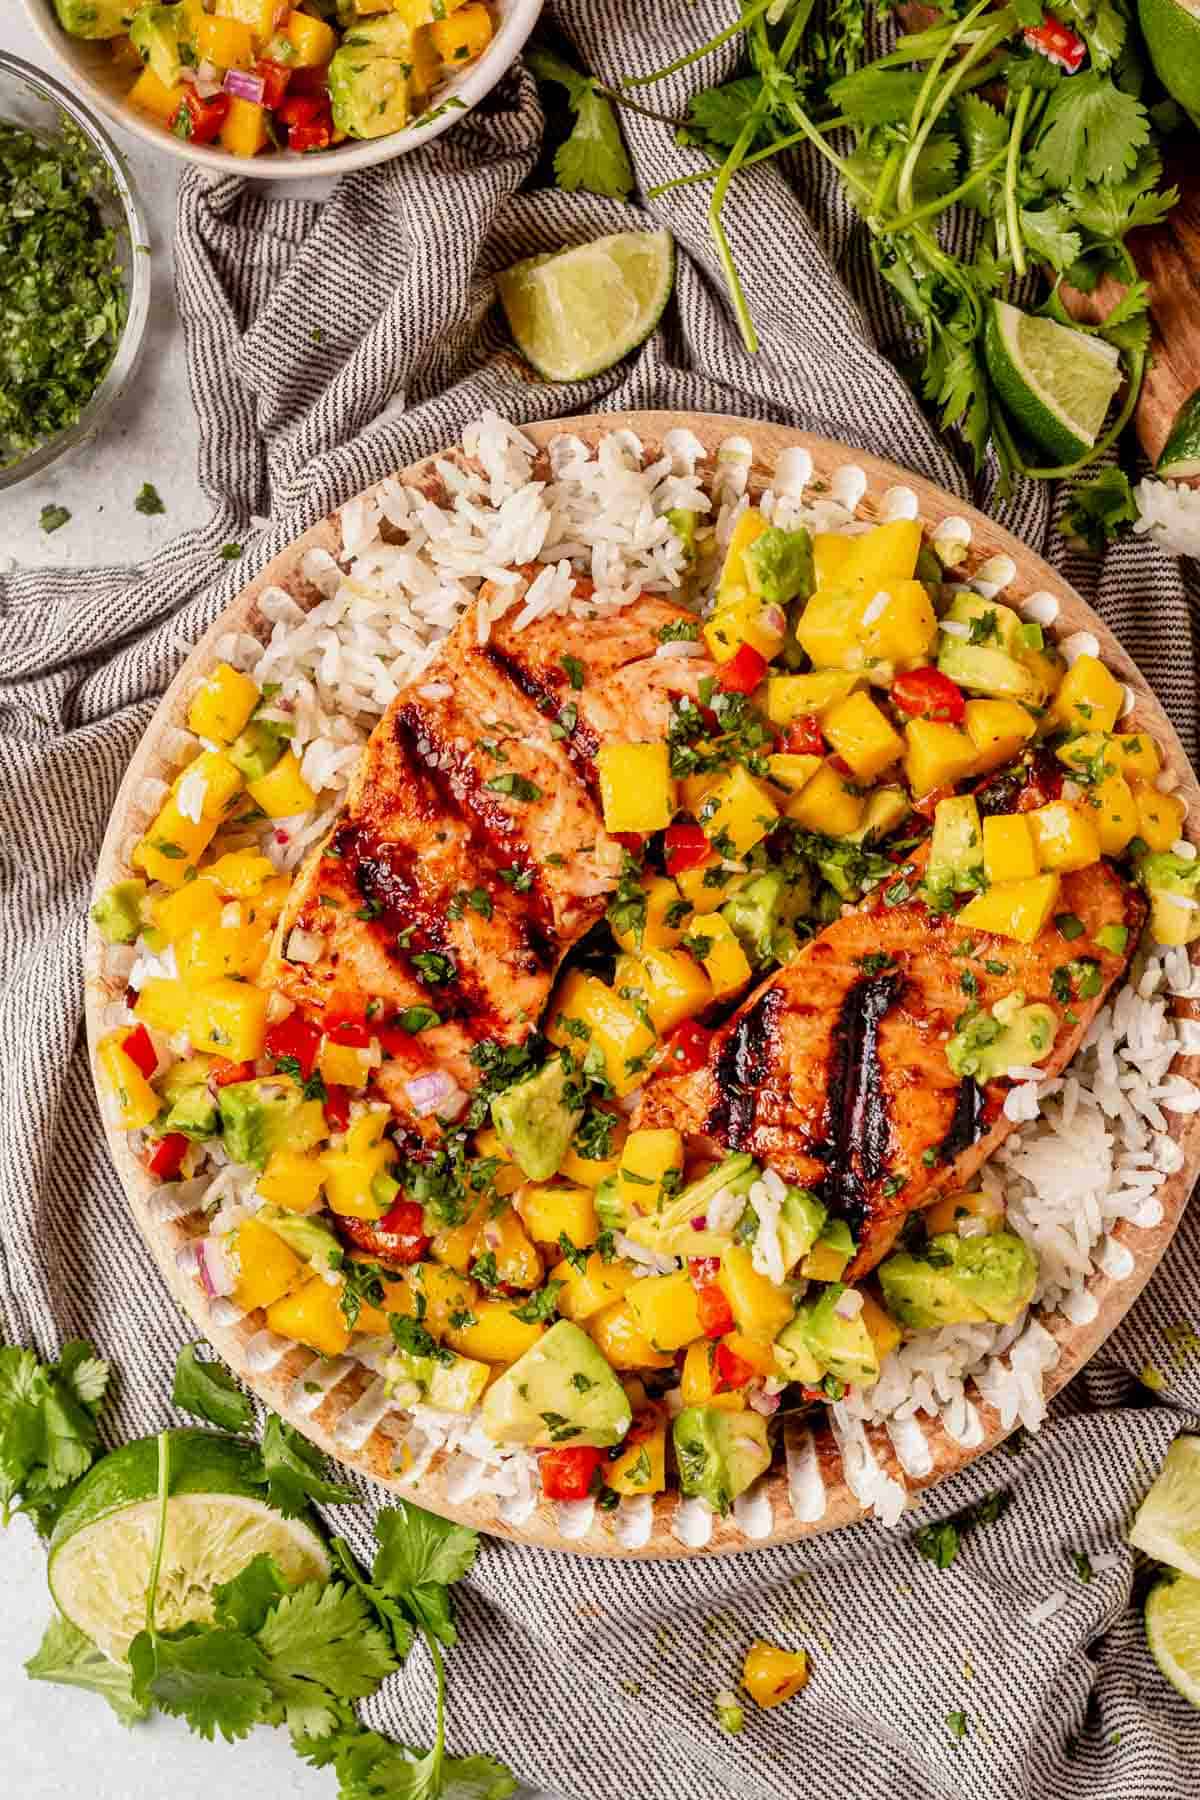 grilled salmon with mango salsa on top of rice